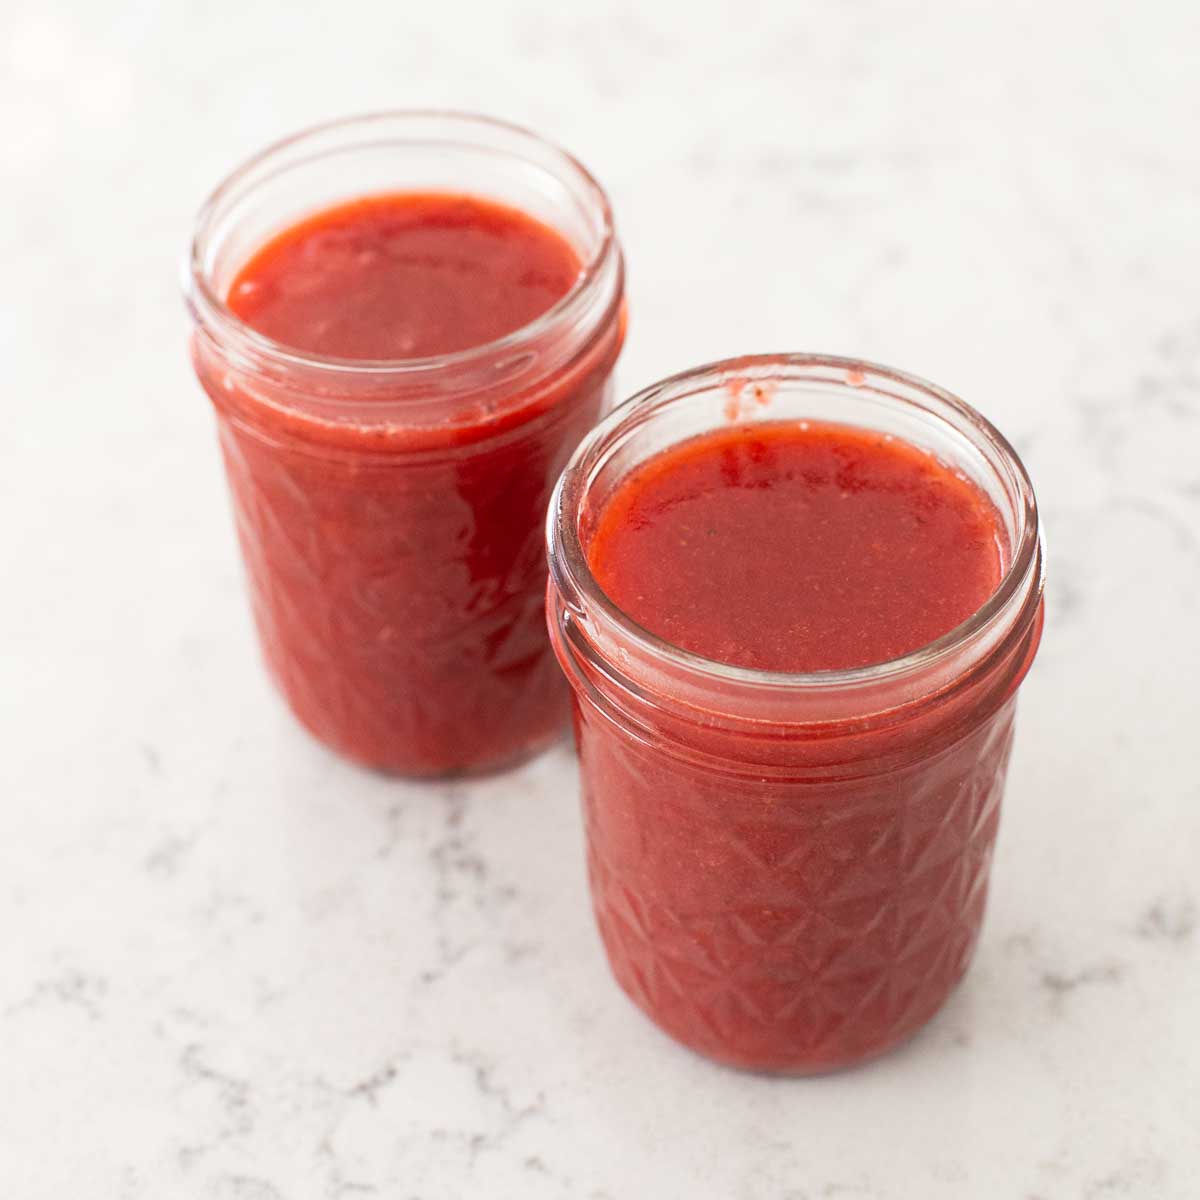 The strawberry sauce has been cooled and ladled into 2 clean mason jars for freezing.